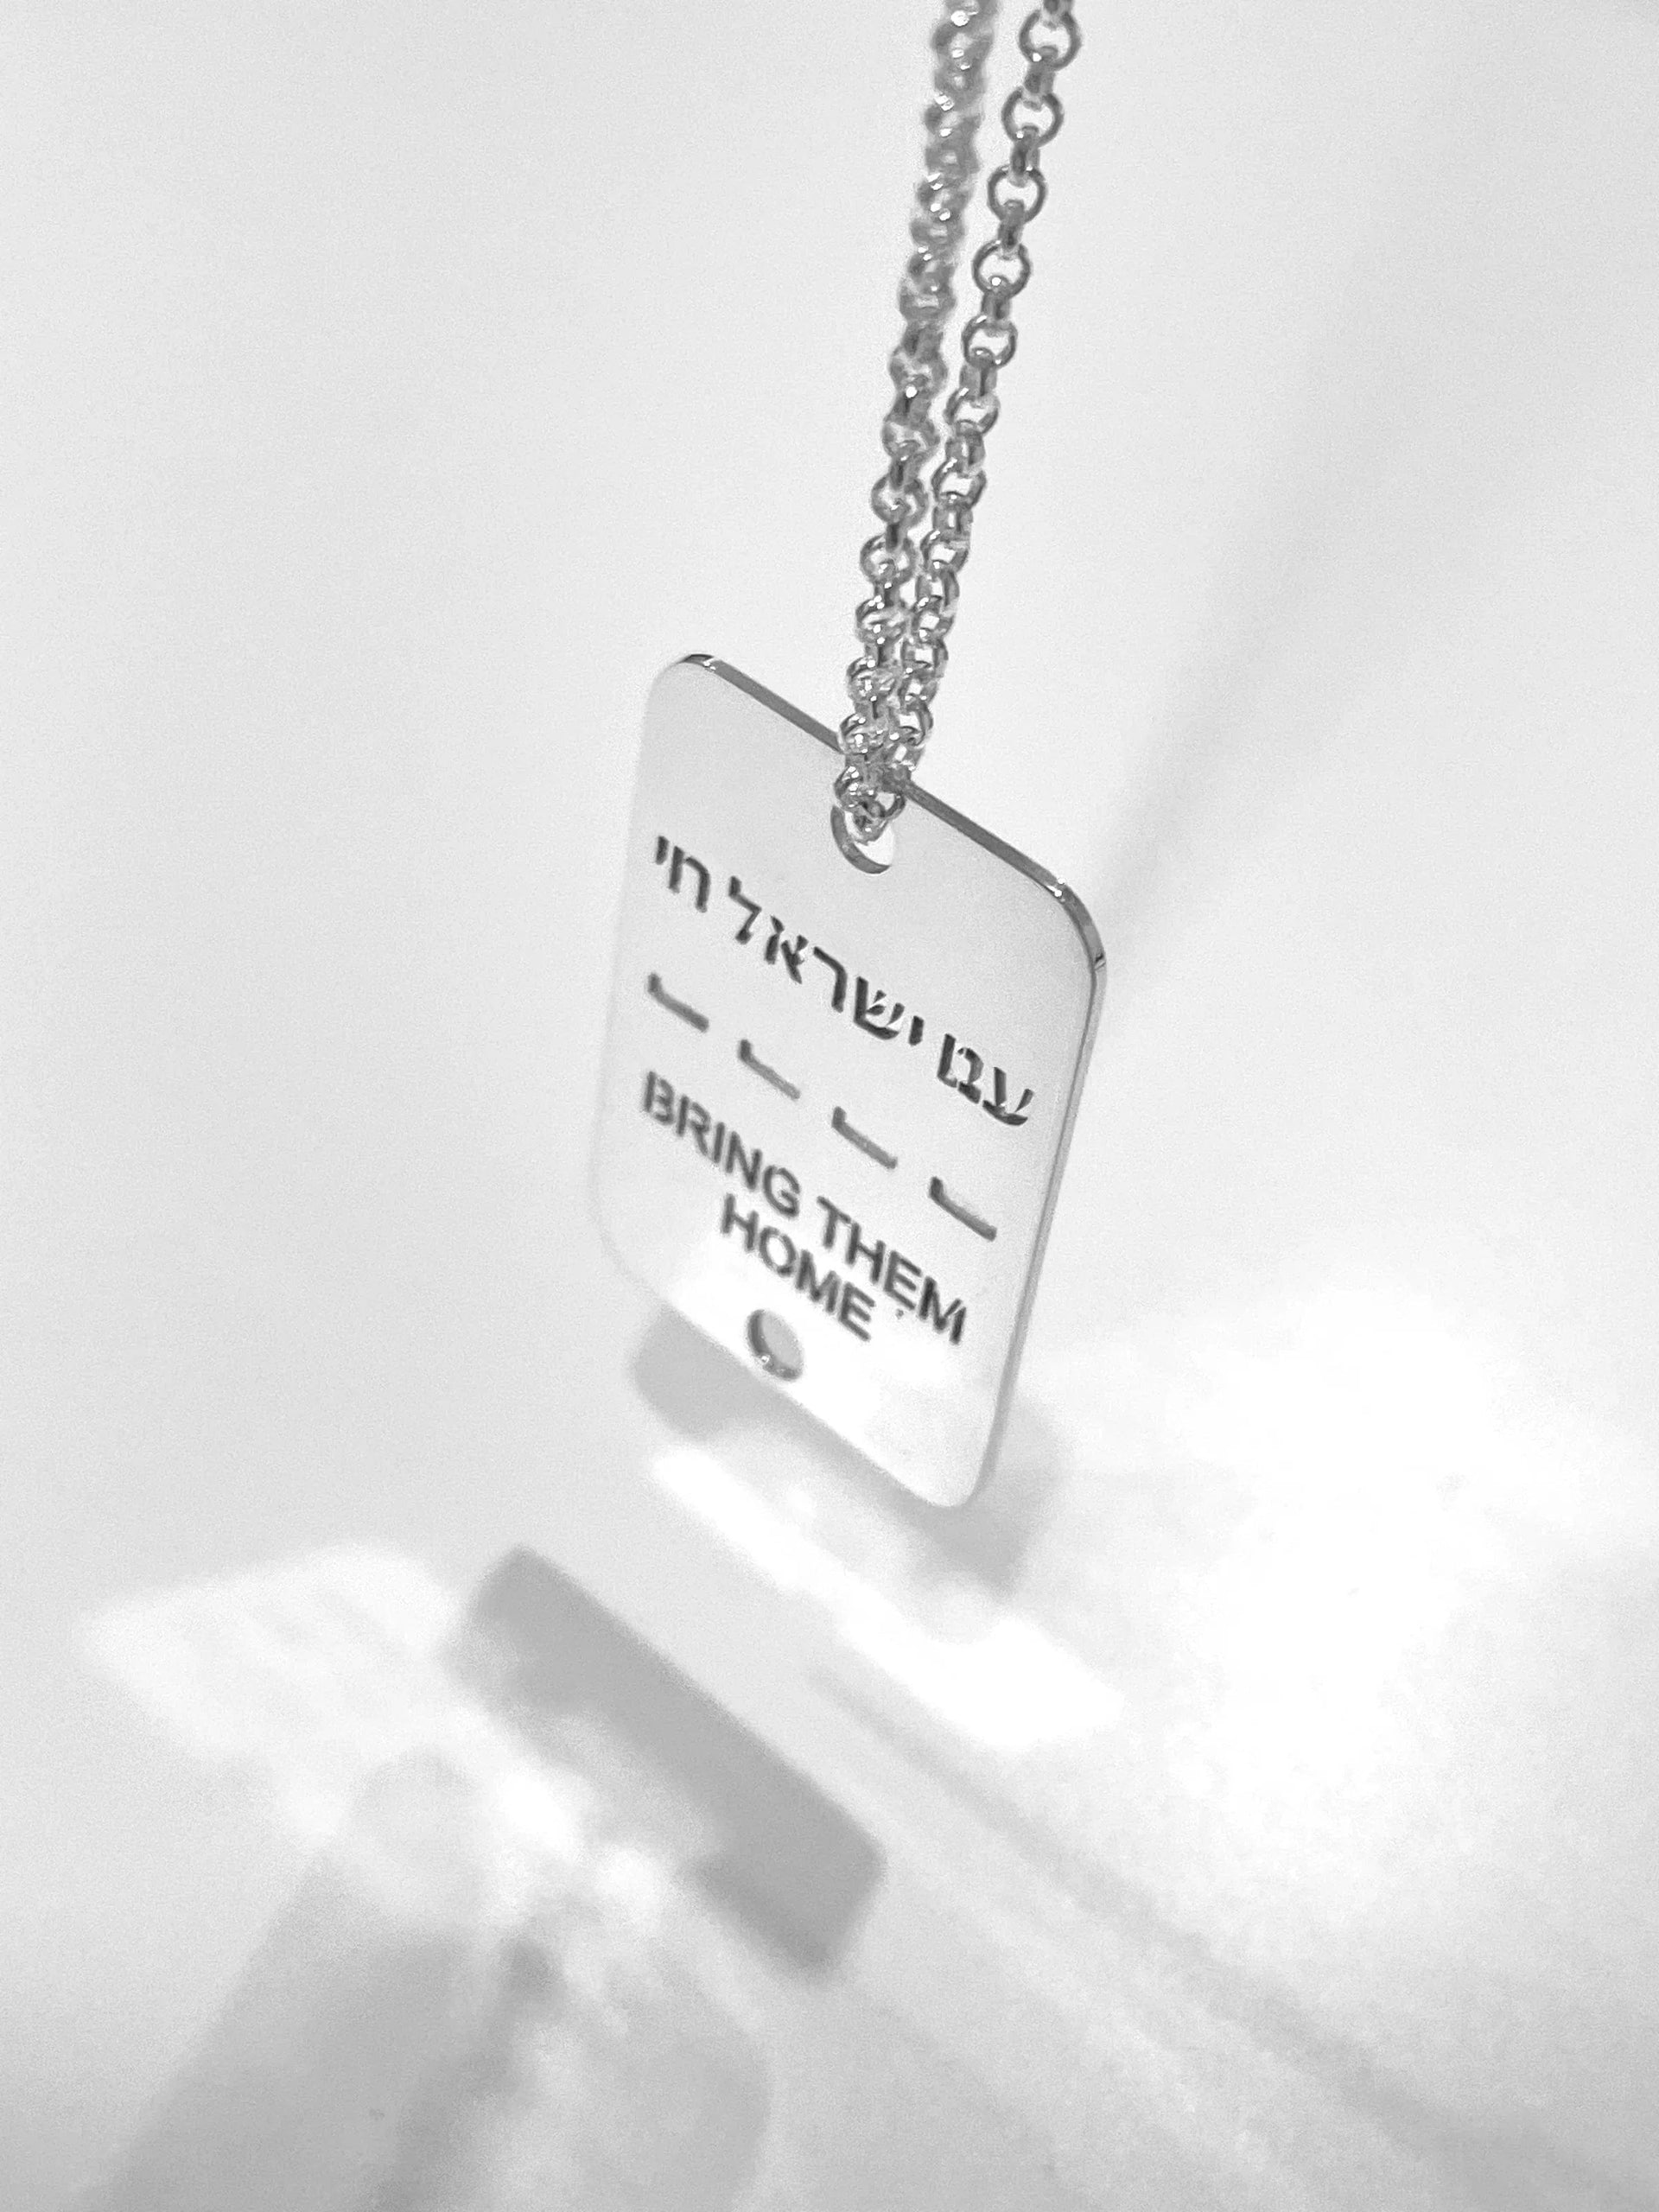 Miriam Merenfeld Jewelry Necklaces Bring Them Home Tag Necklace - Sterling Silver 32" - 100% of Profits Donated